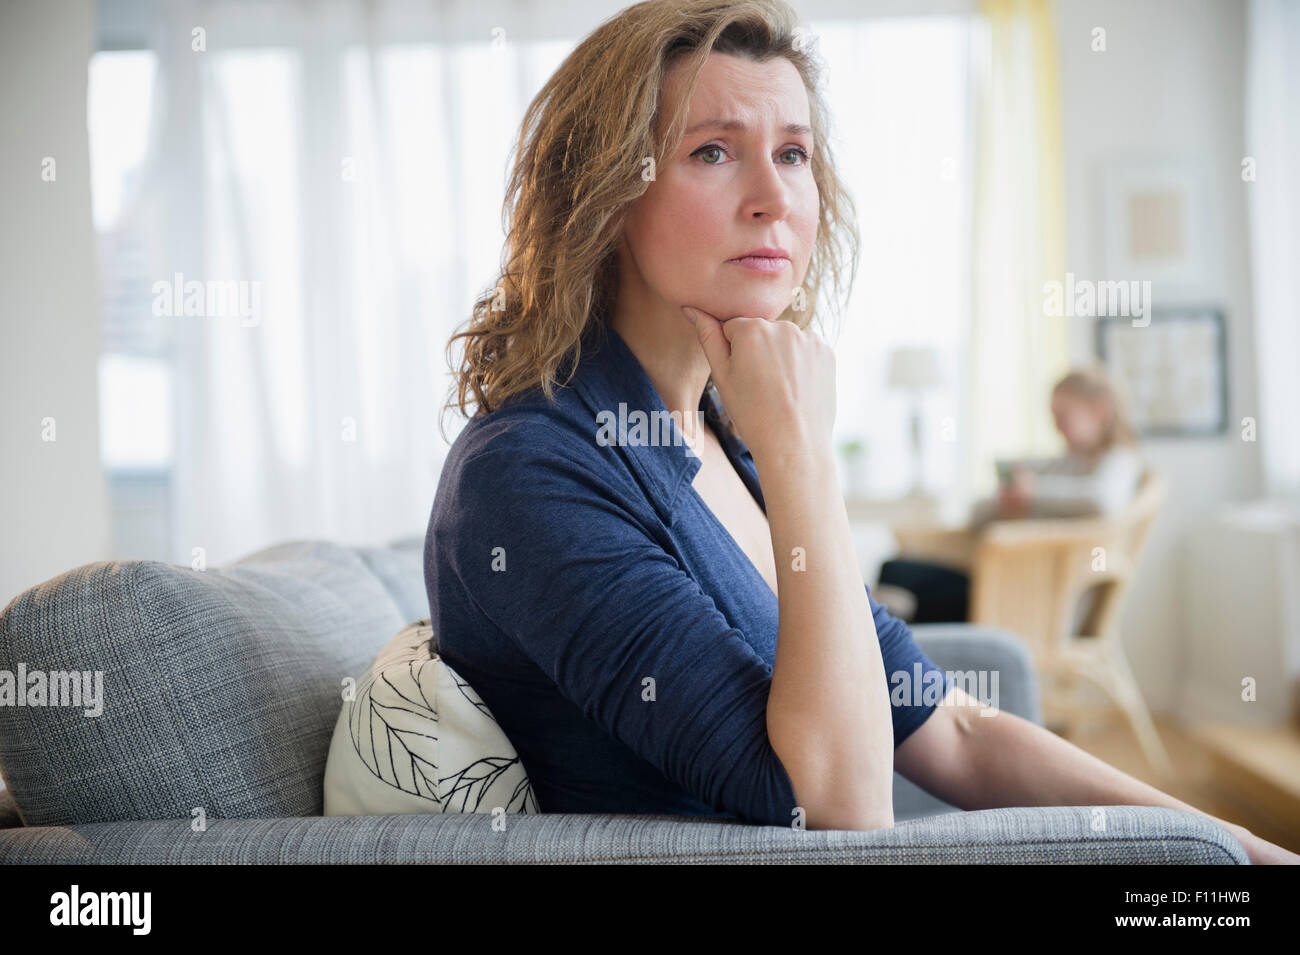 Concerned Caucasian woman sitting on sofa Stock Photo